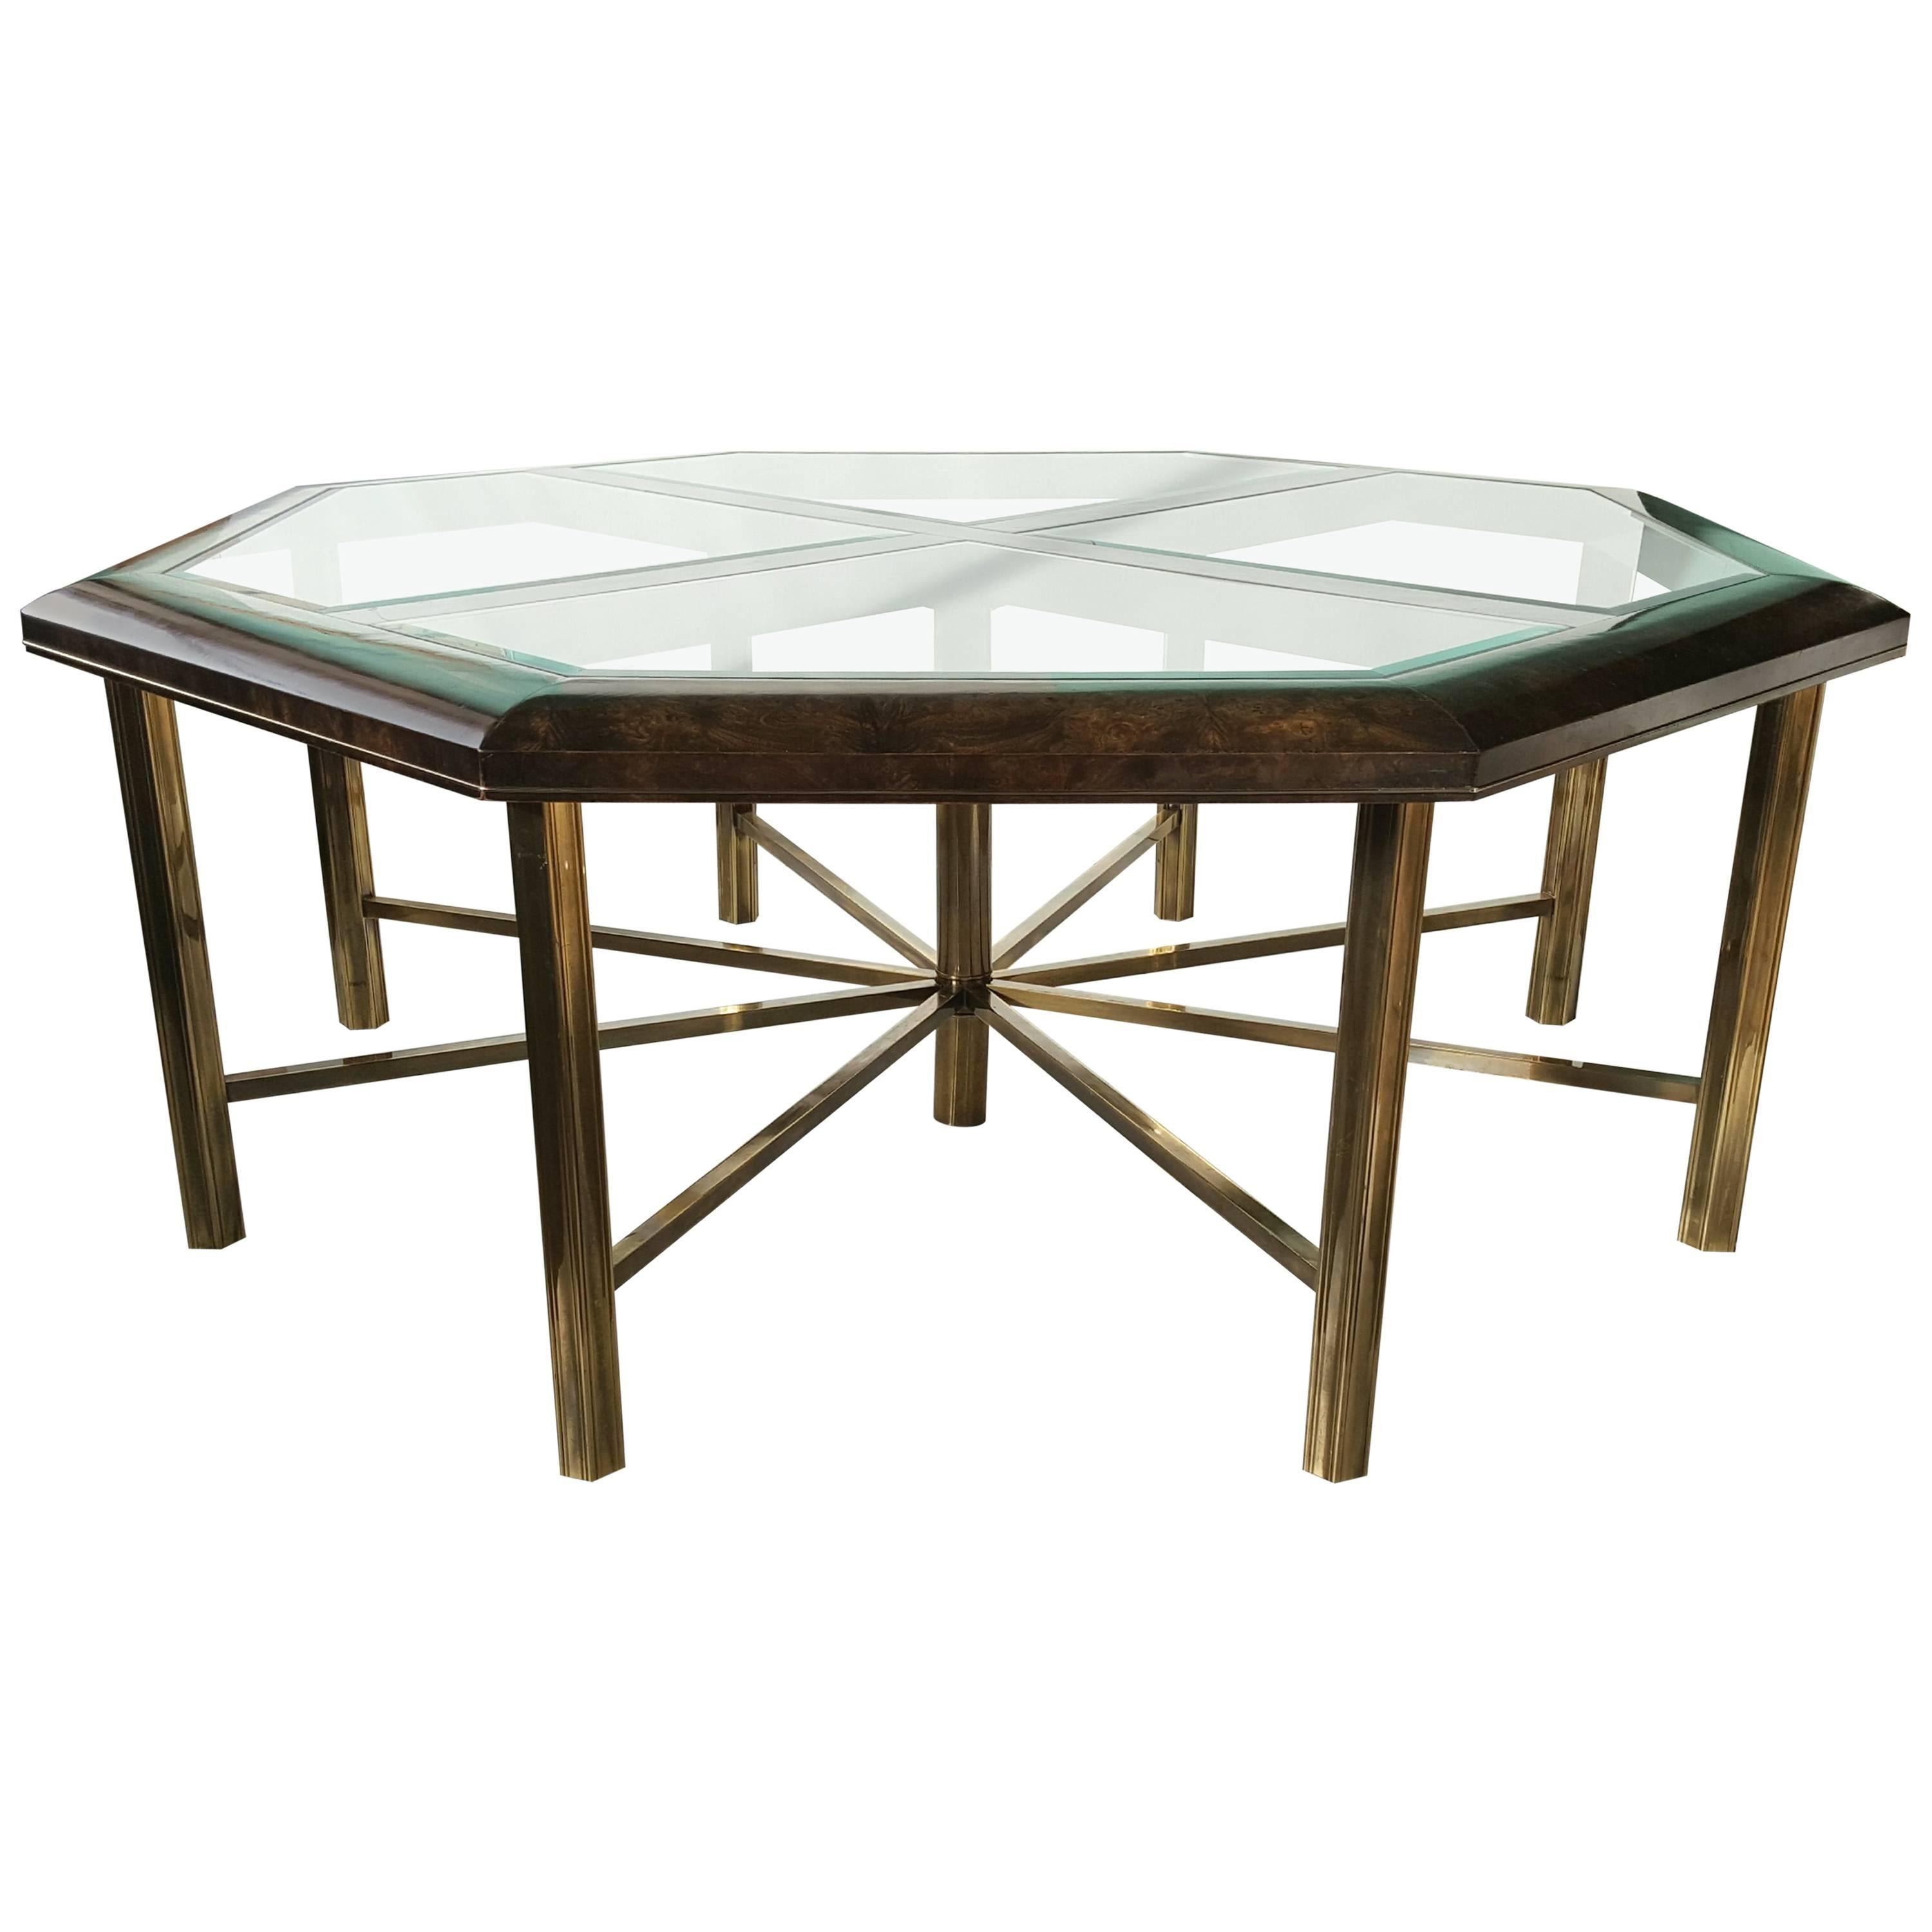 Monumental Burl Elm and Brass Eight-Sided Dining Table by Mastercraft For Sale